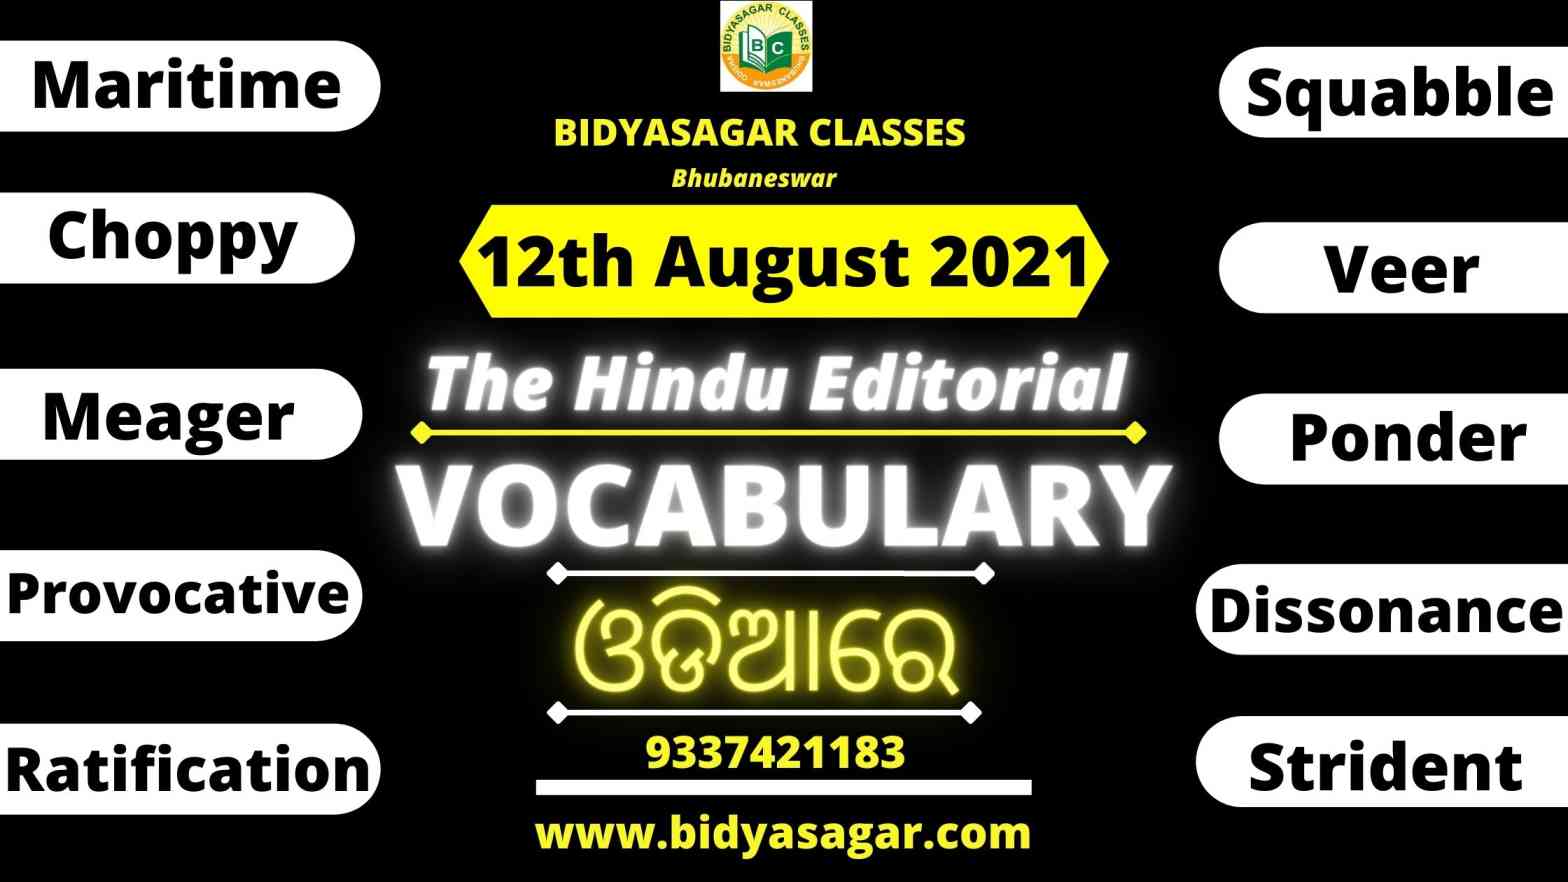 The Hindu Editorial Vocabulary of 12th August 2021